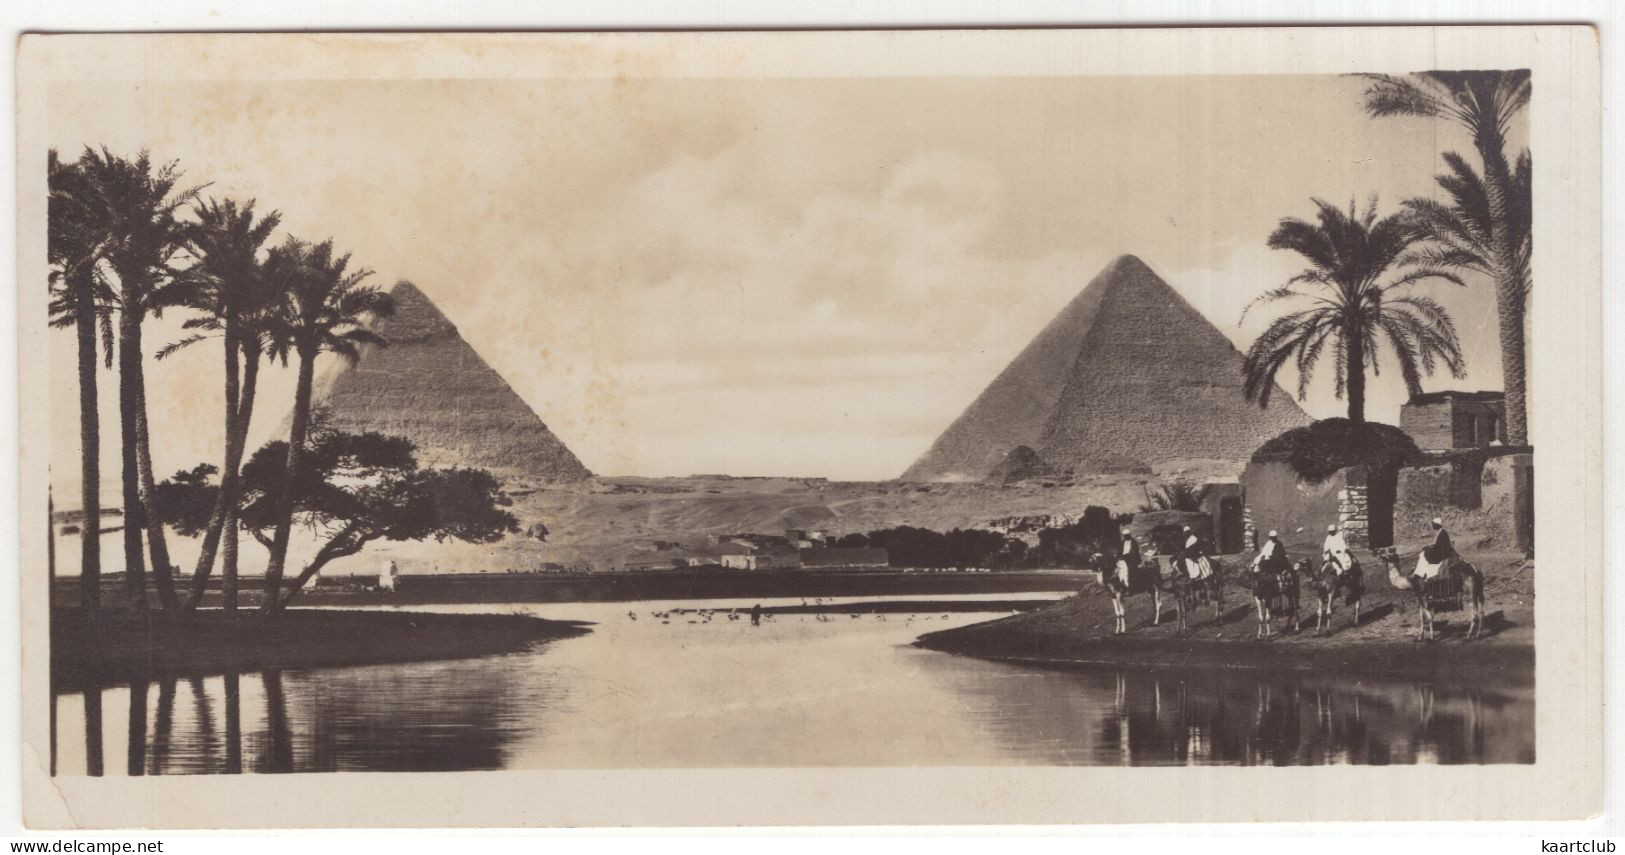 Cairo. Innondation At The Pyramids - (Egypt) - No. 3 - Zogolopoulo Frères, Cairo - (Size: 15 Cm X 7.5 Cm) - Le Caire